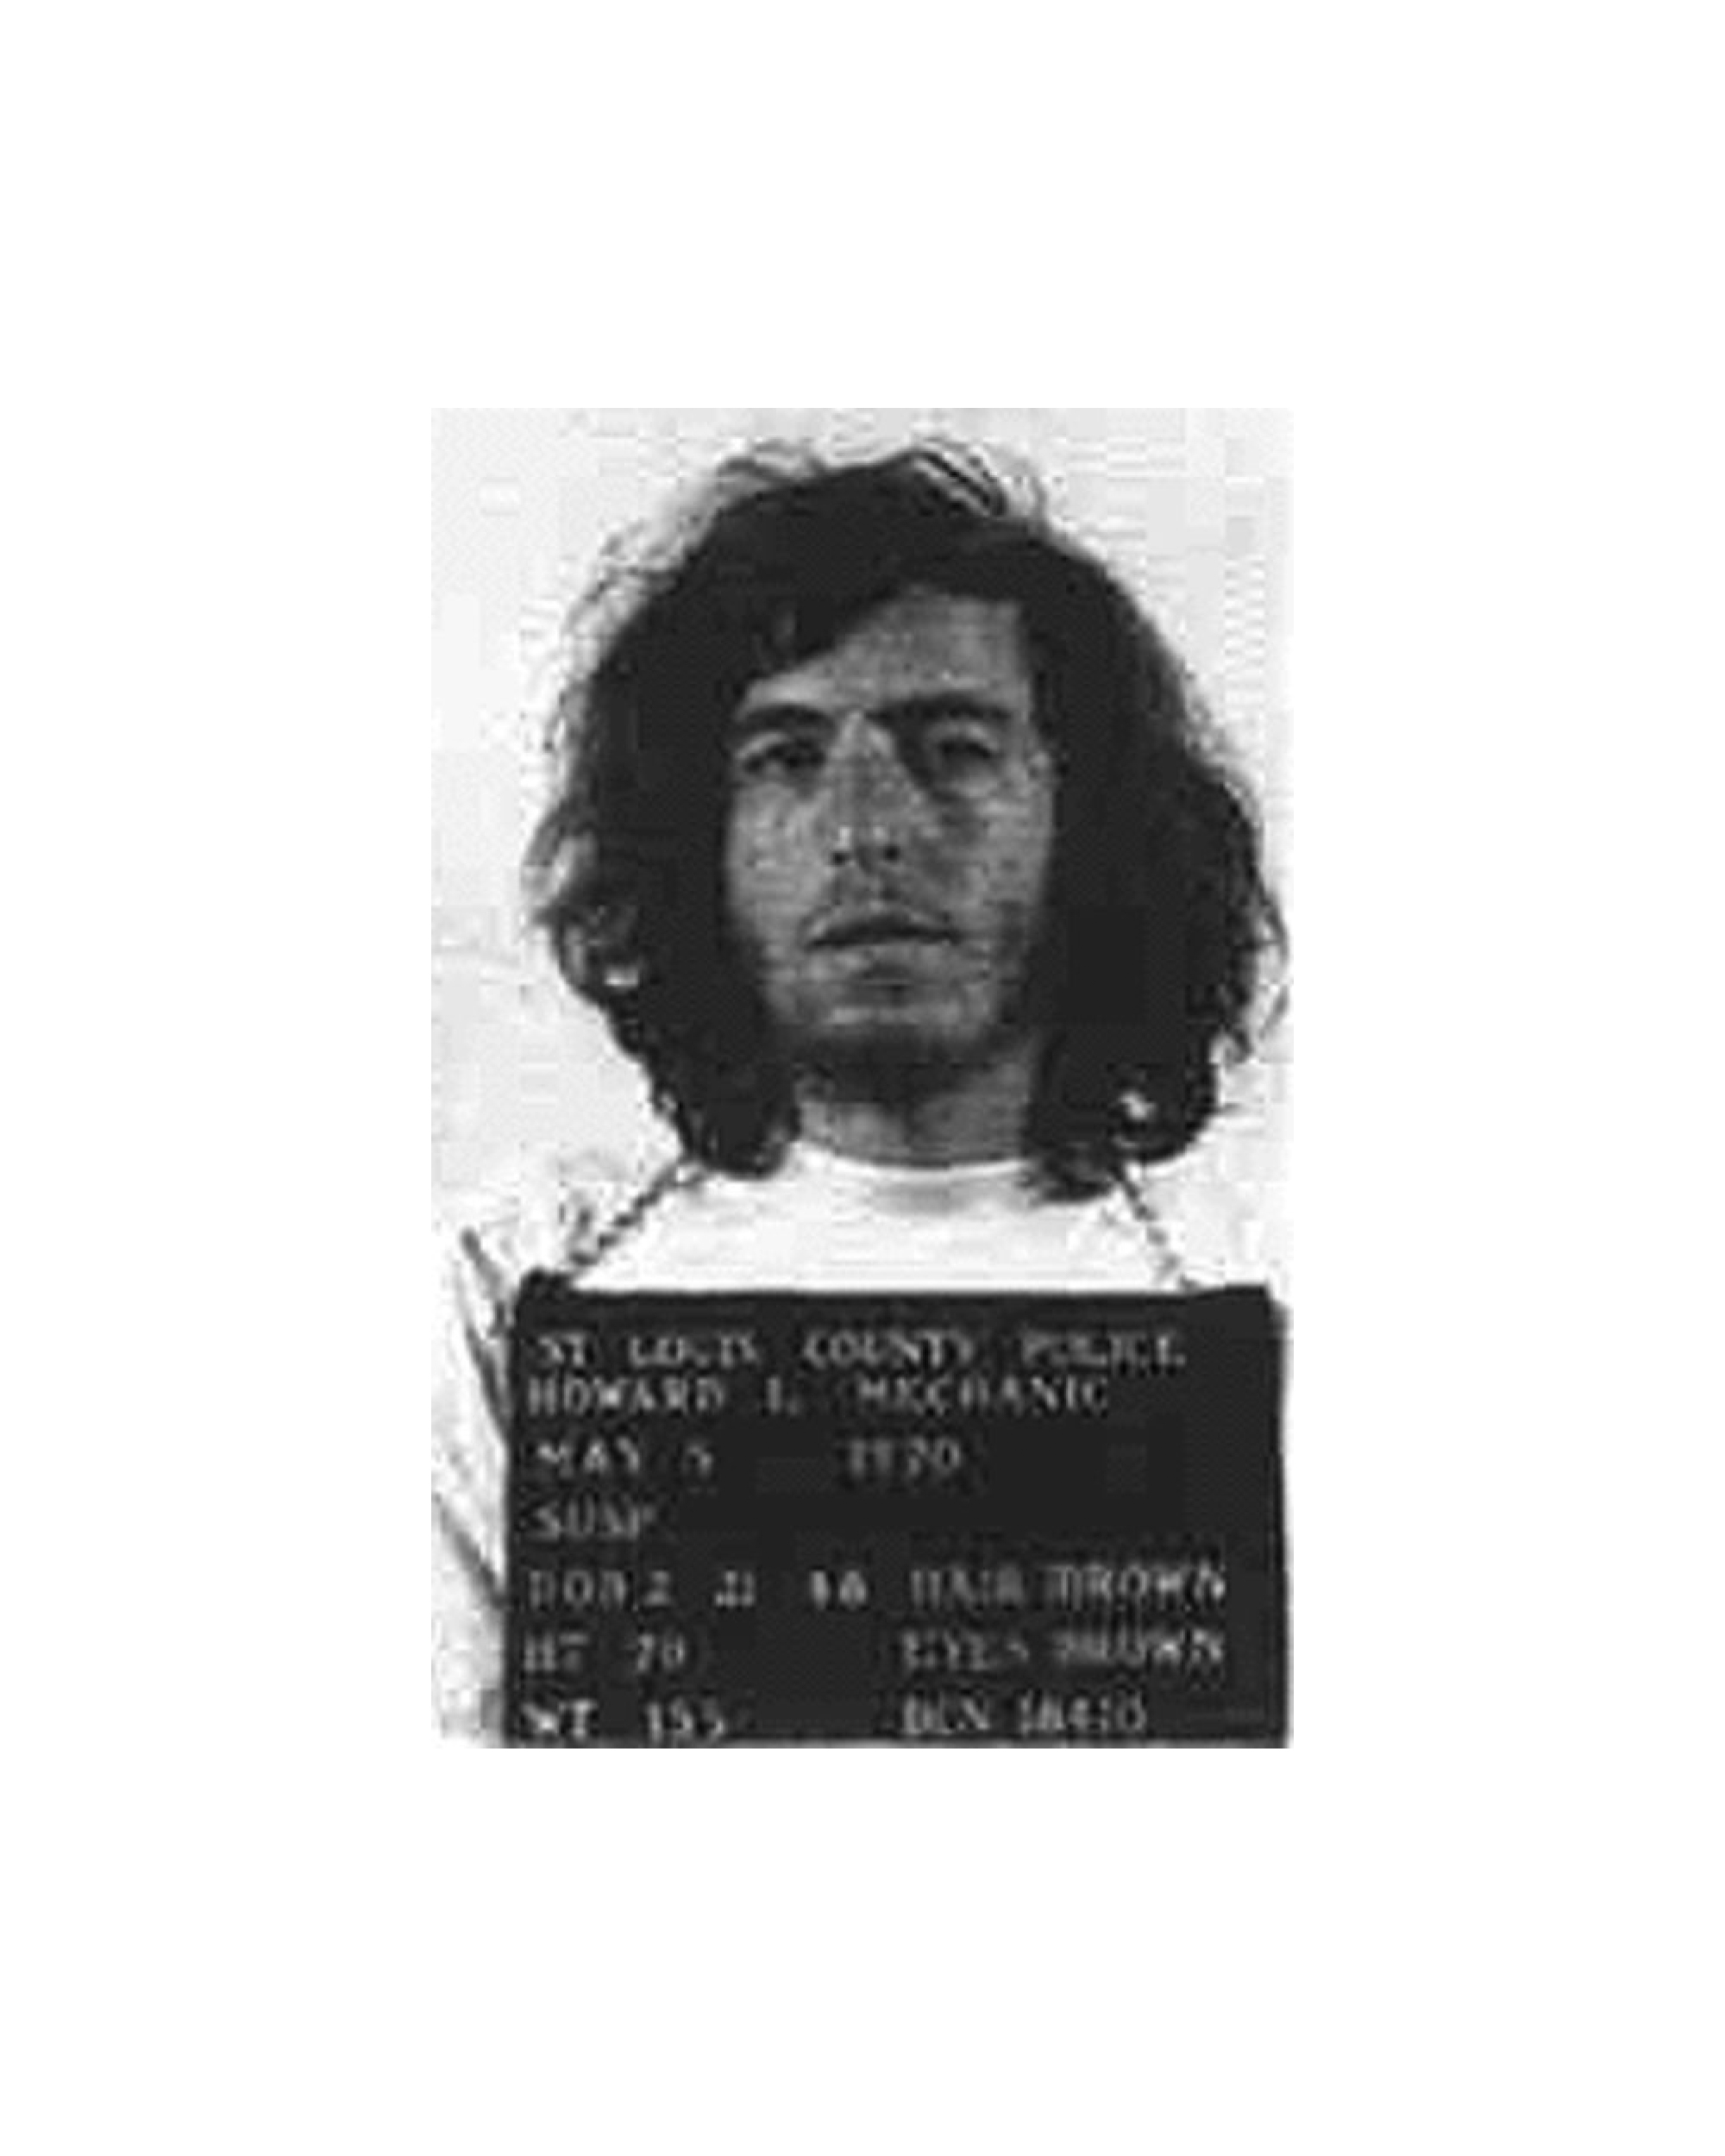 Howard’s mugshot following his arrest for allegedly throwing a cherry bomb at riot police during protests at Washington University.